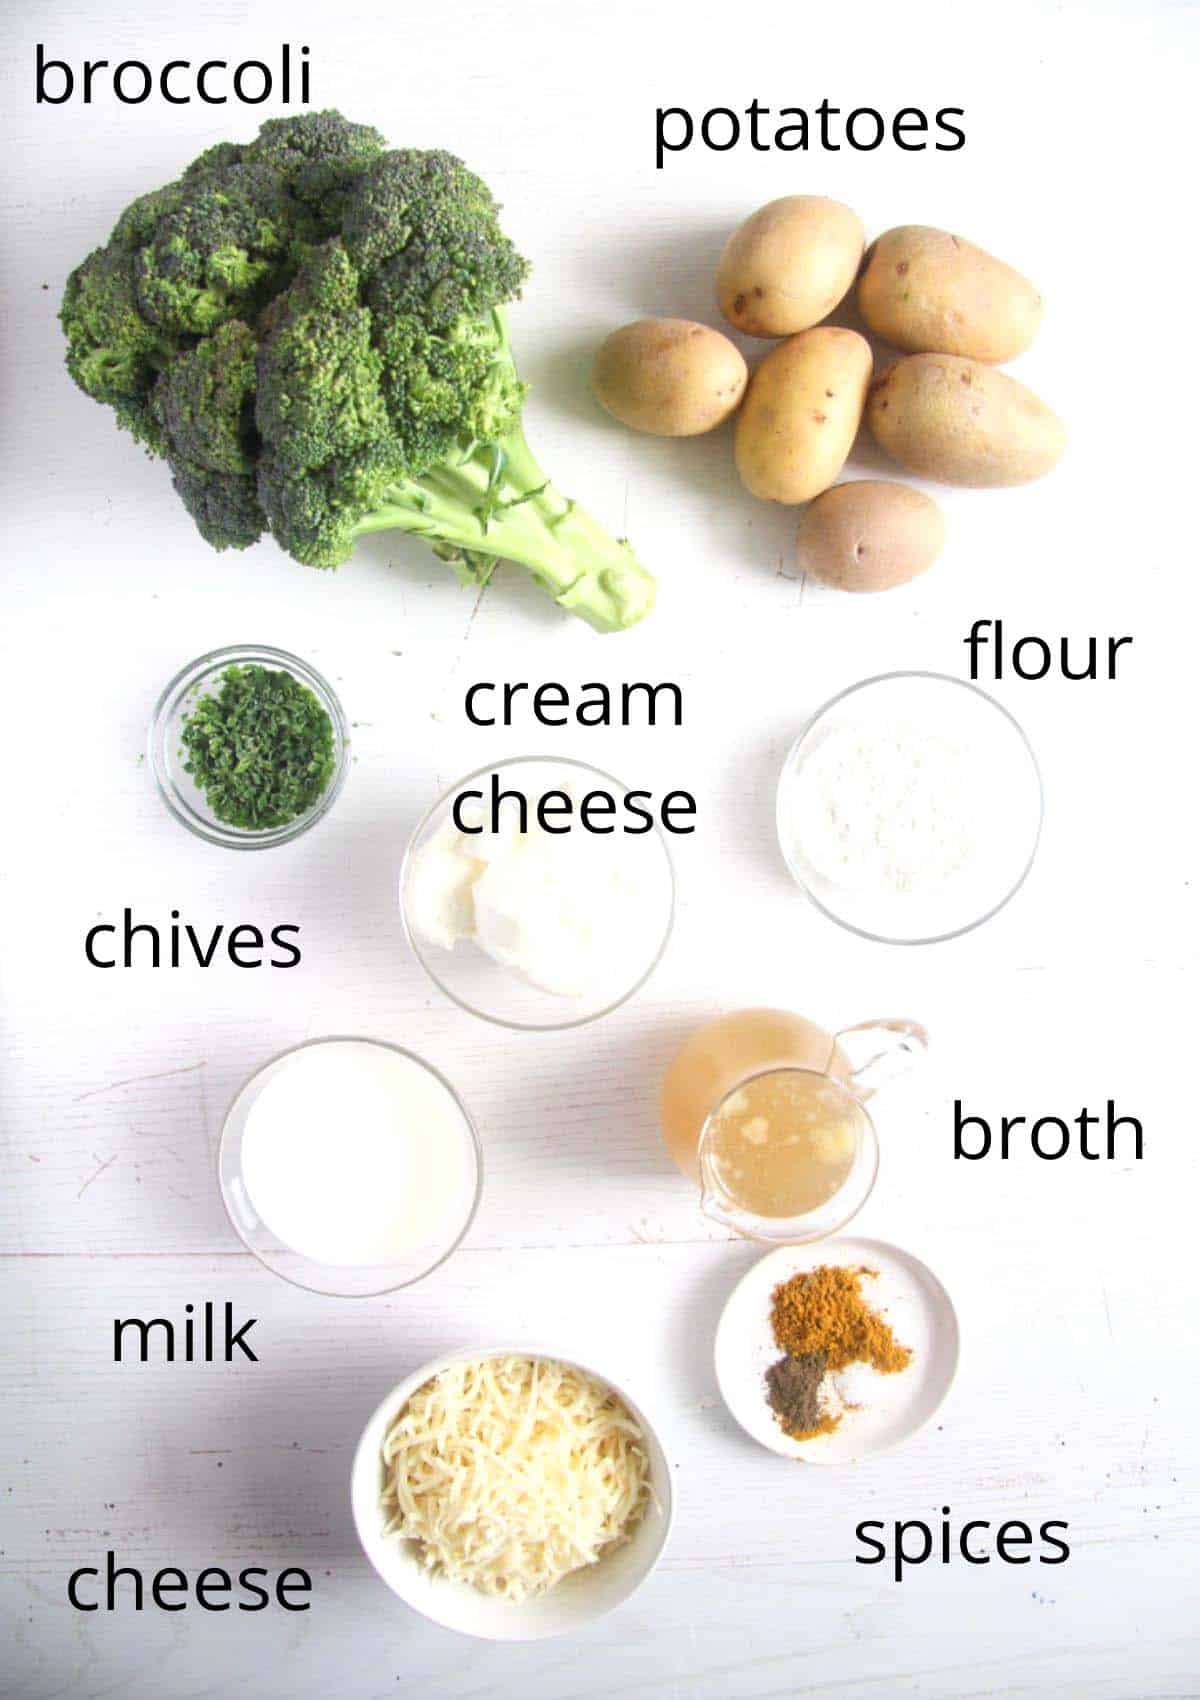 all the ingredients for broccoli potato bake on the table.